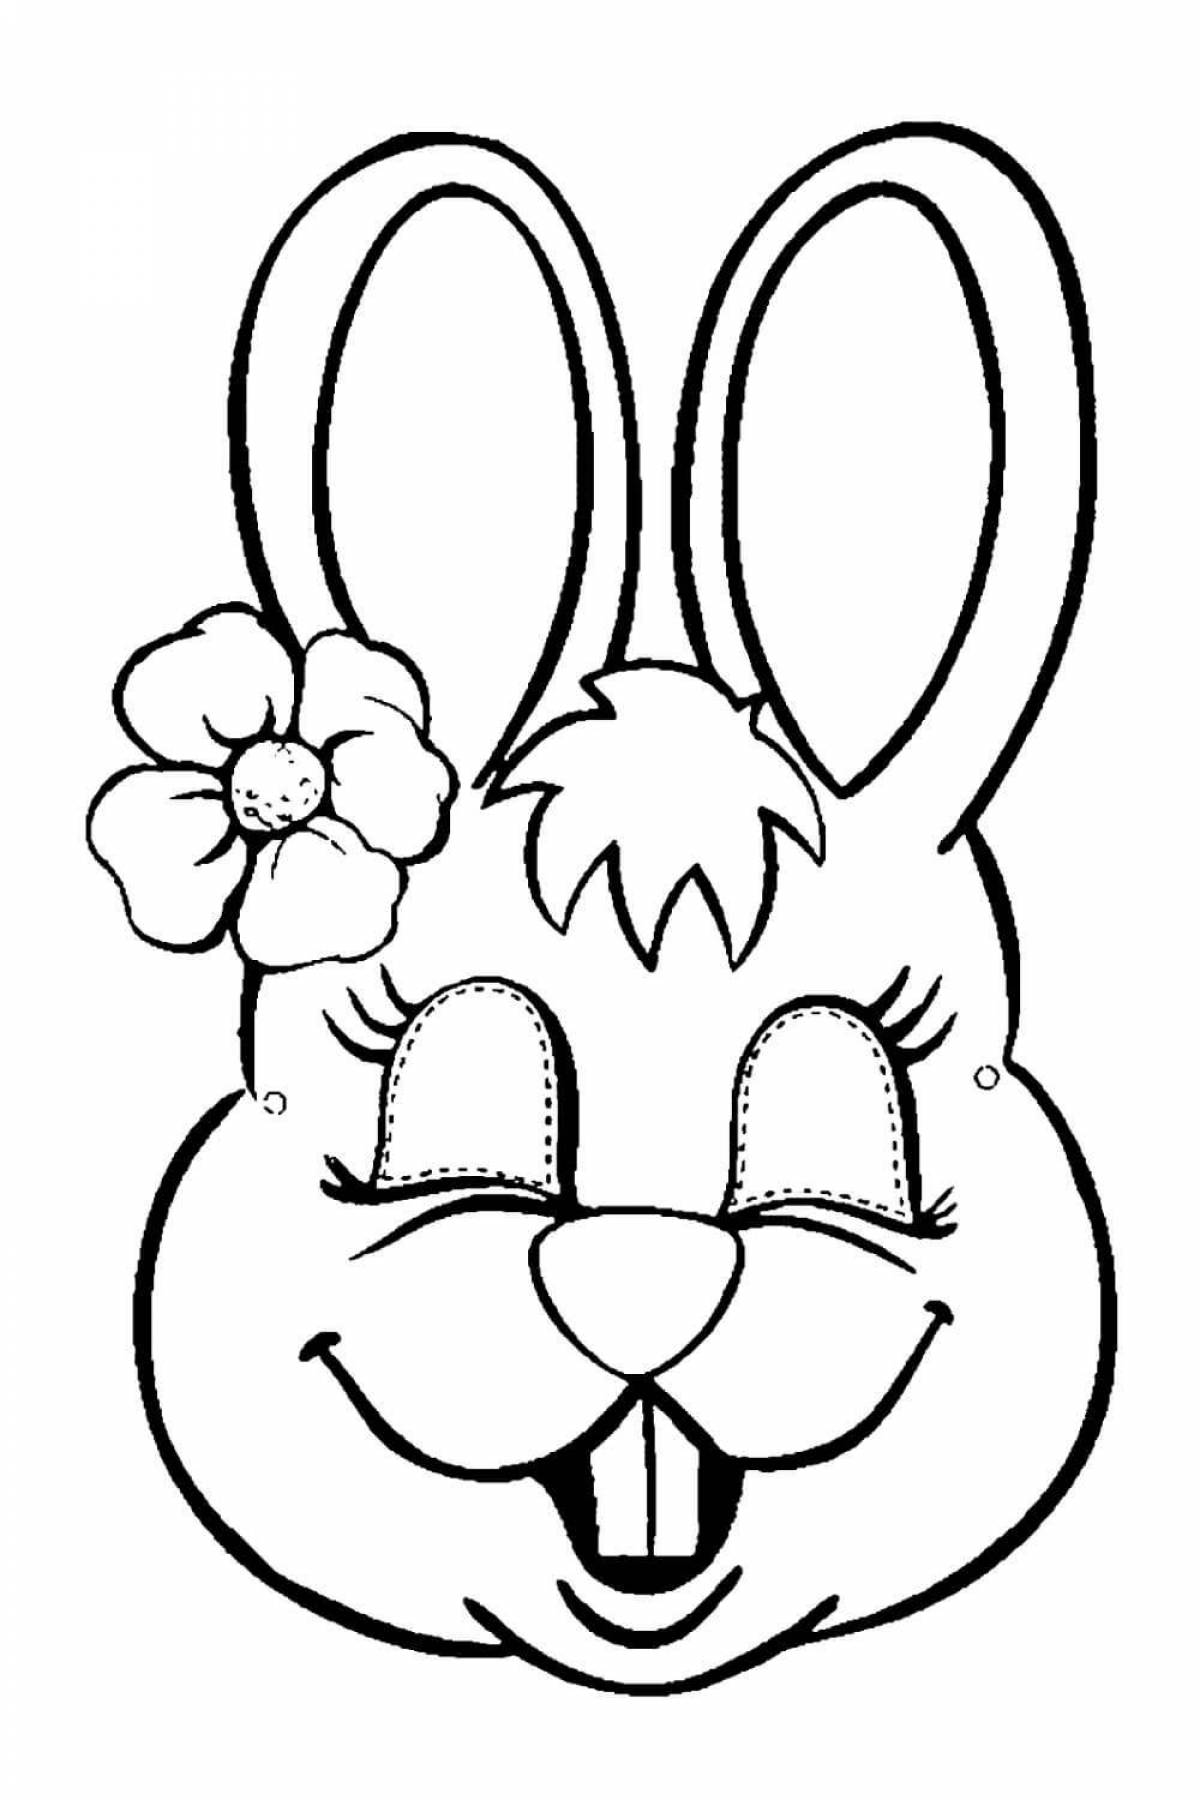 Fancy rabbit mask coloring page